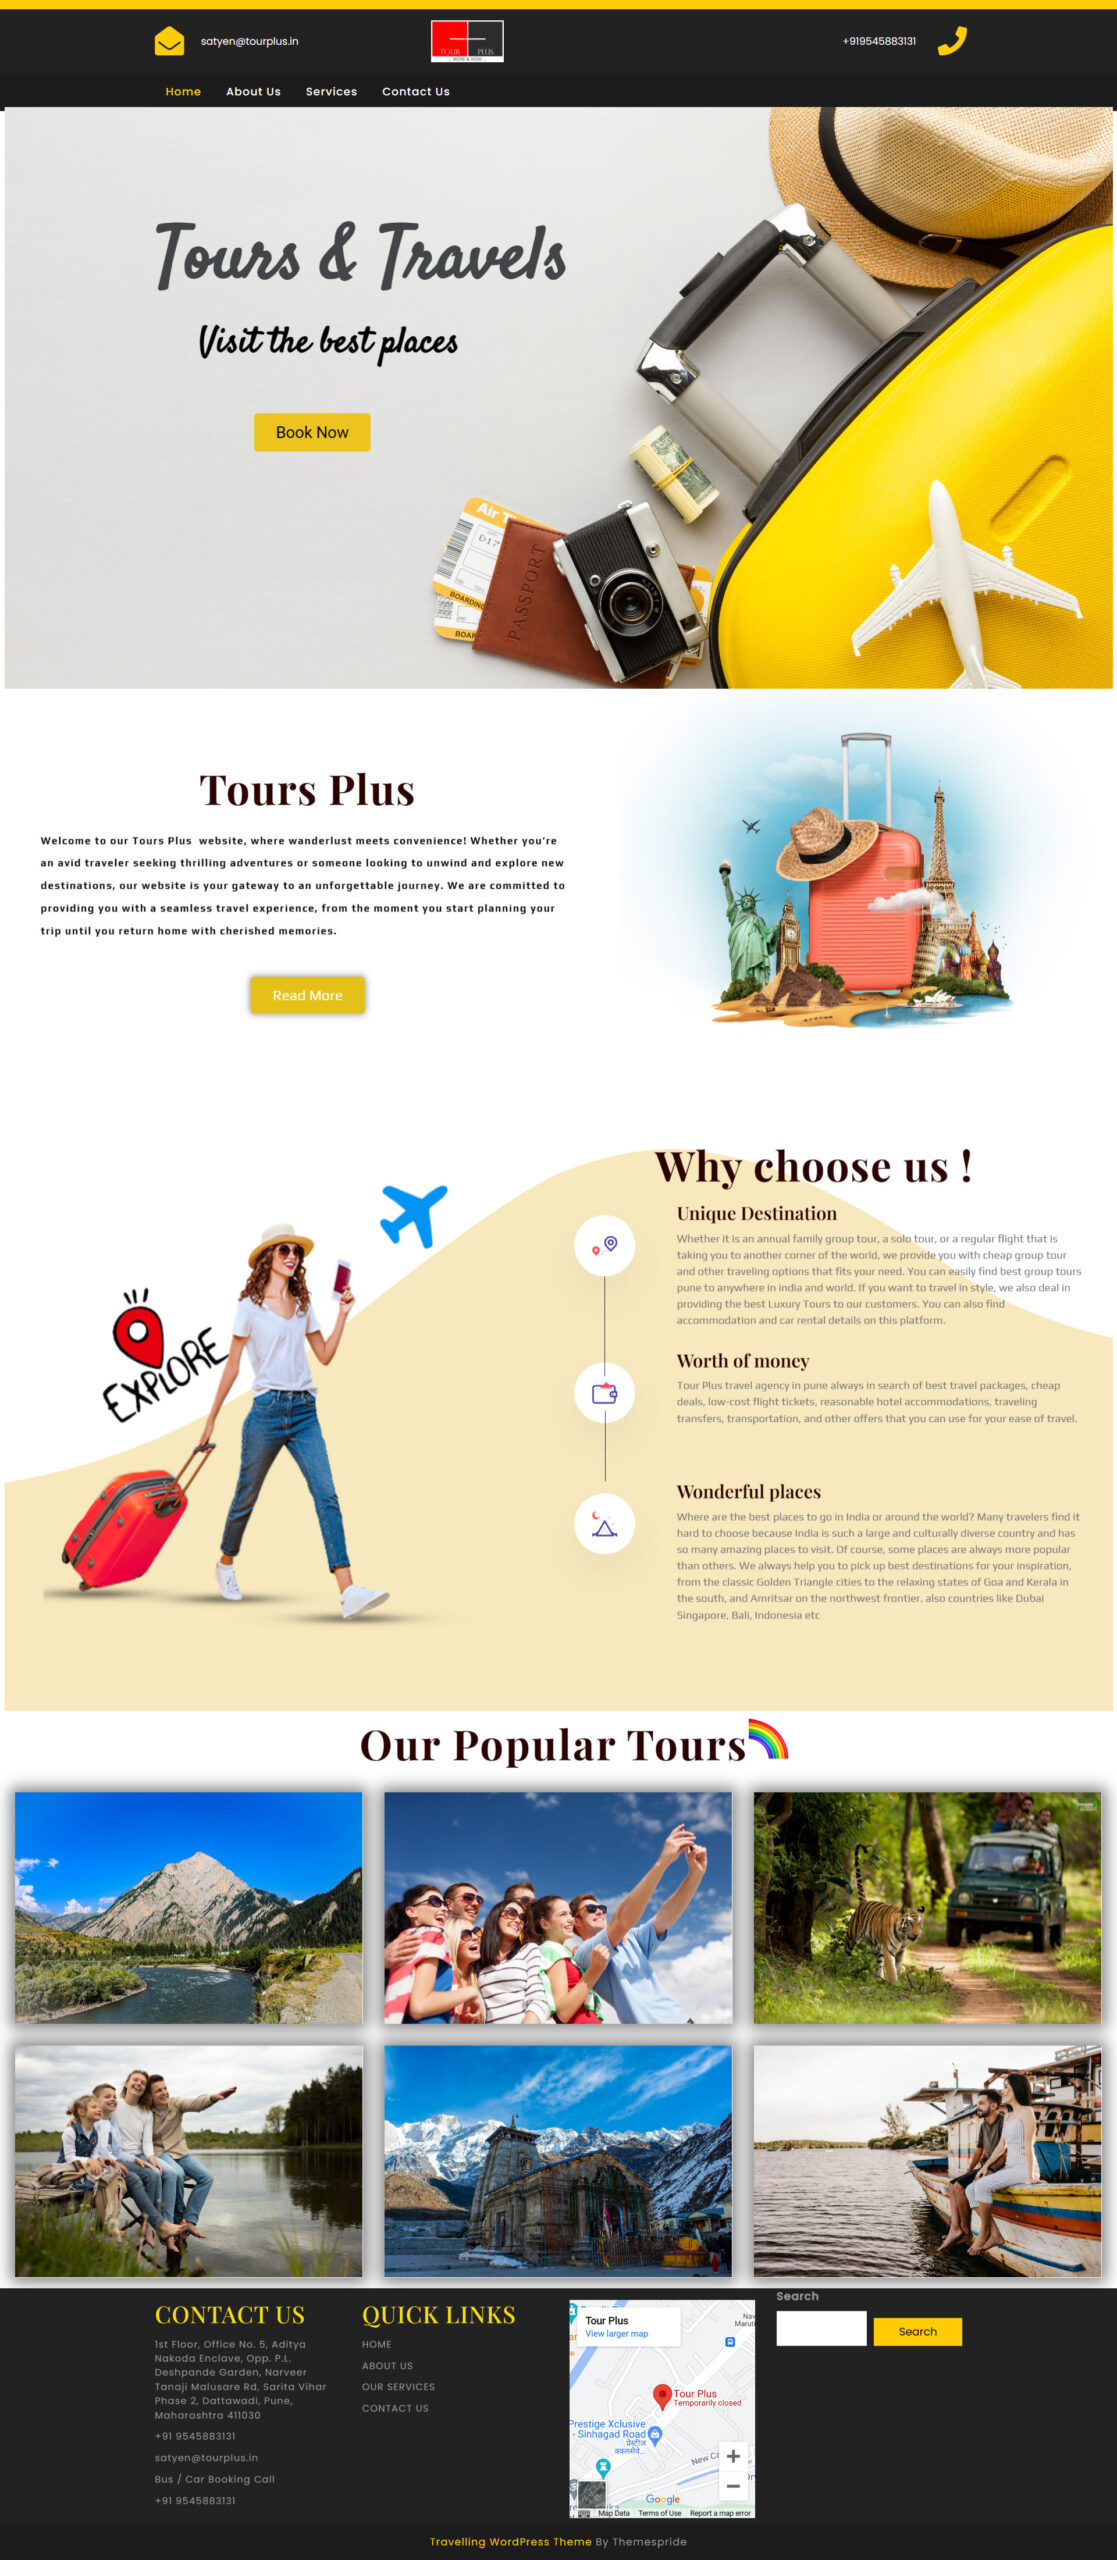 tours and travel website